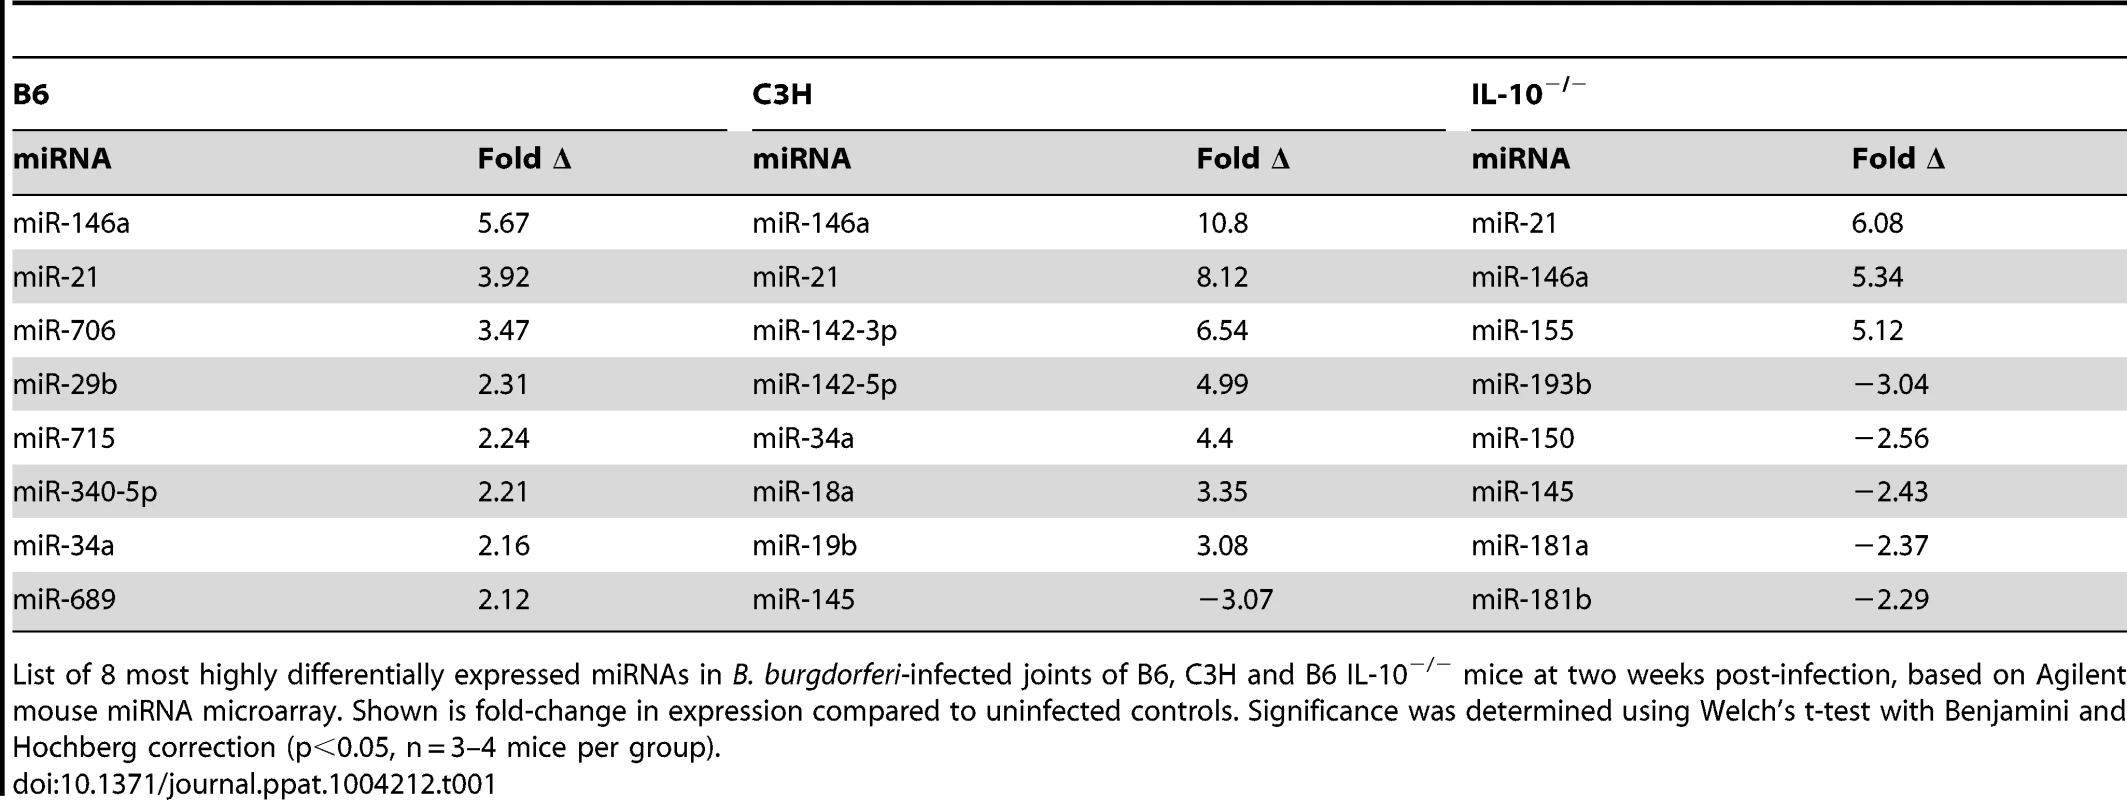 MicroRNAs most highly changed in expression, based on microarray, in joints of different mouse strains.